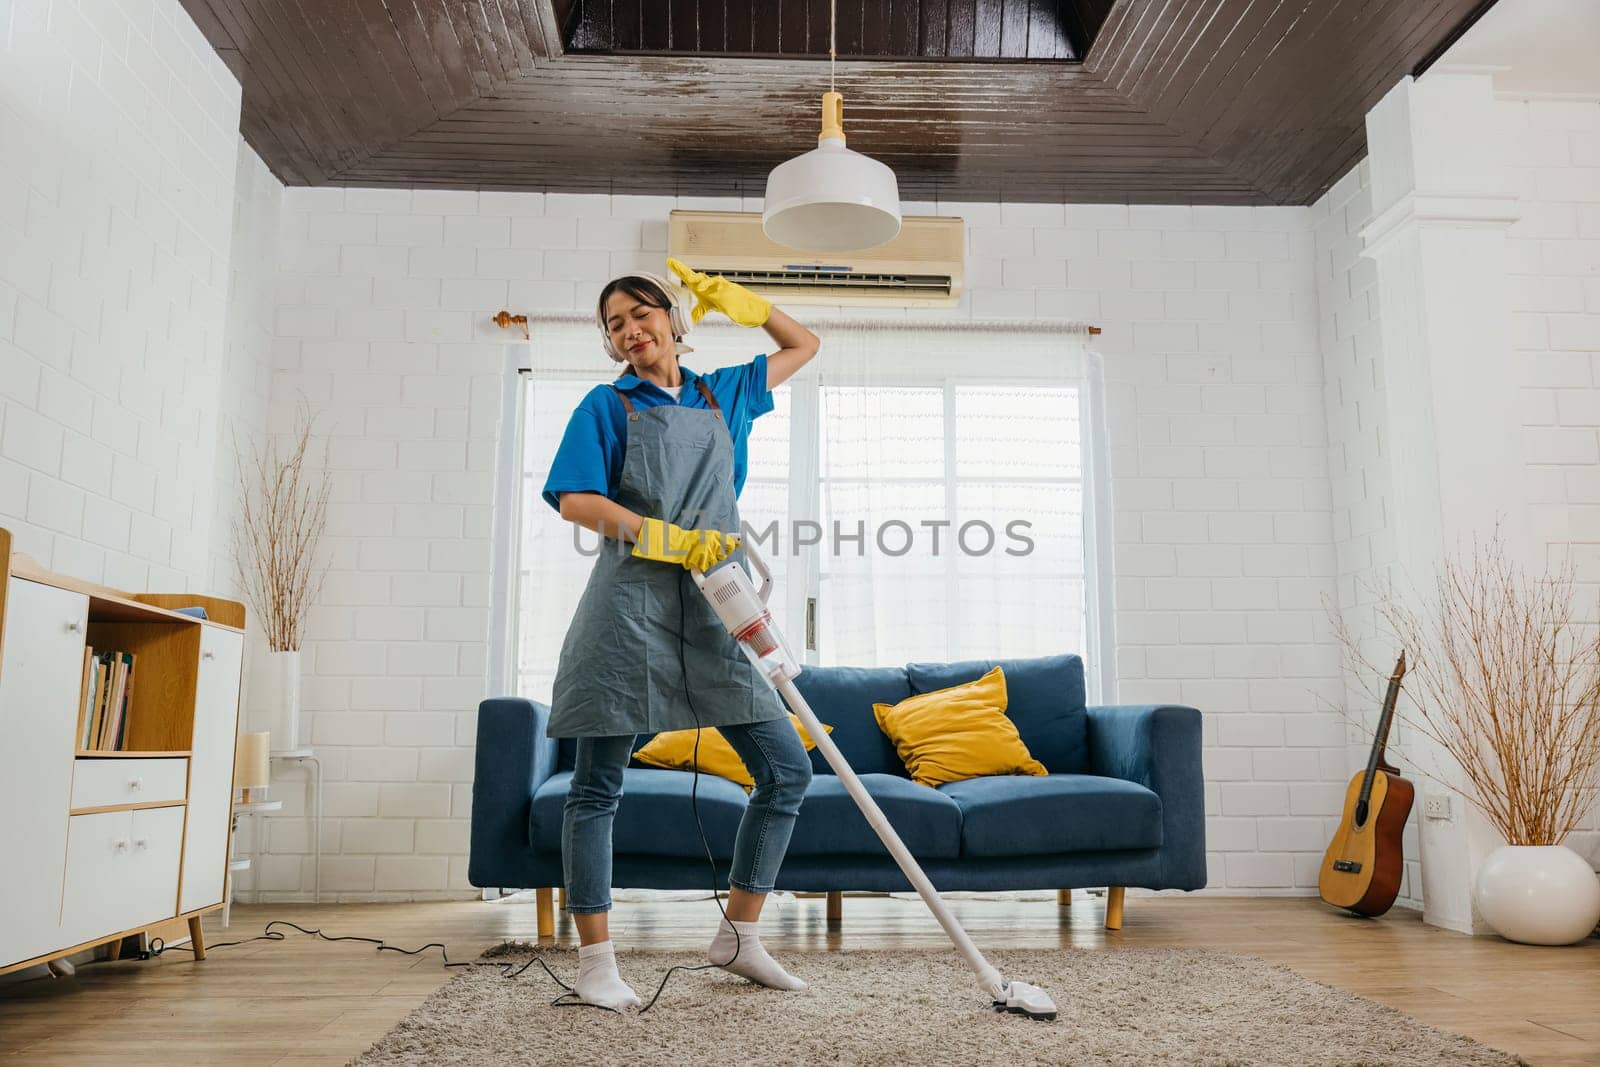 Asian housewife's fun cleaning, singing dancing with mop microphone. Joyful occupation filled with music laughter. Modern housework enjoyment. Give me a rhythm, maid dancing having fun